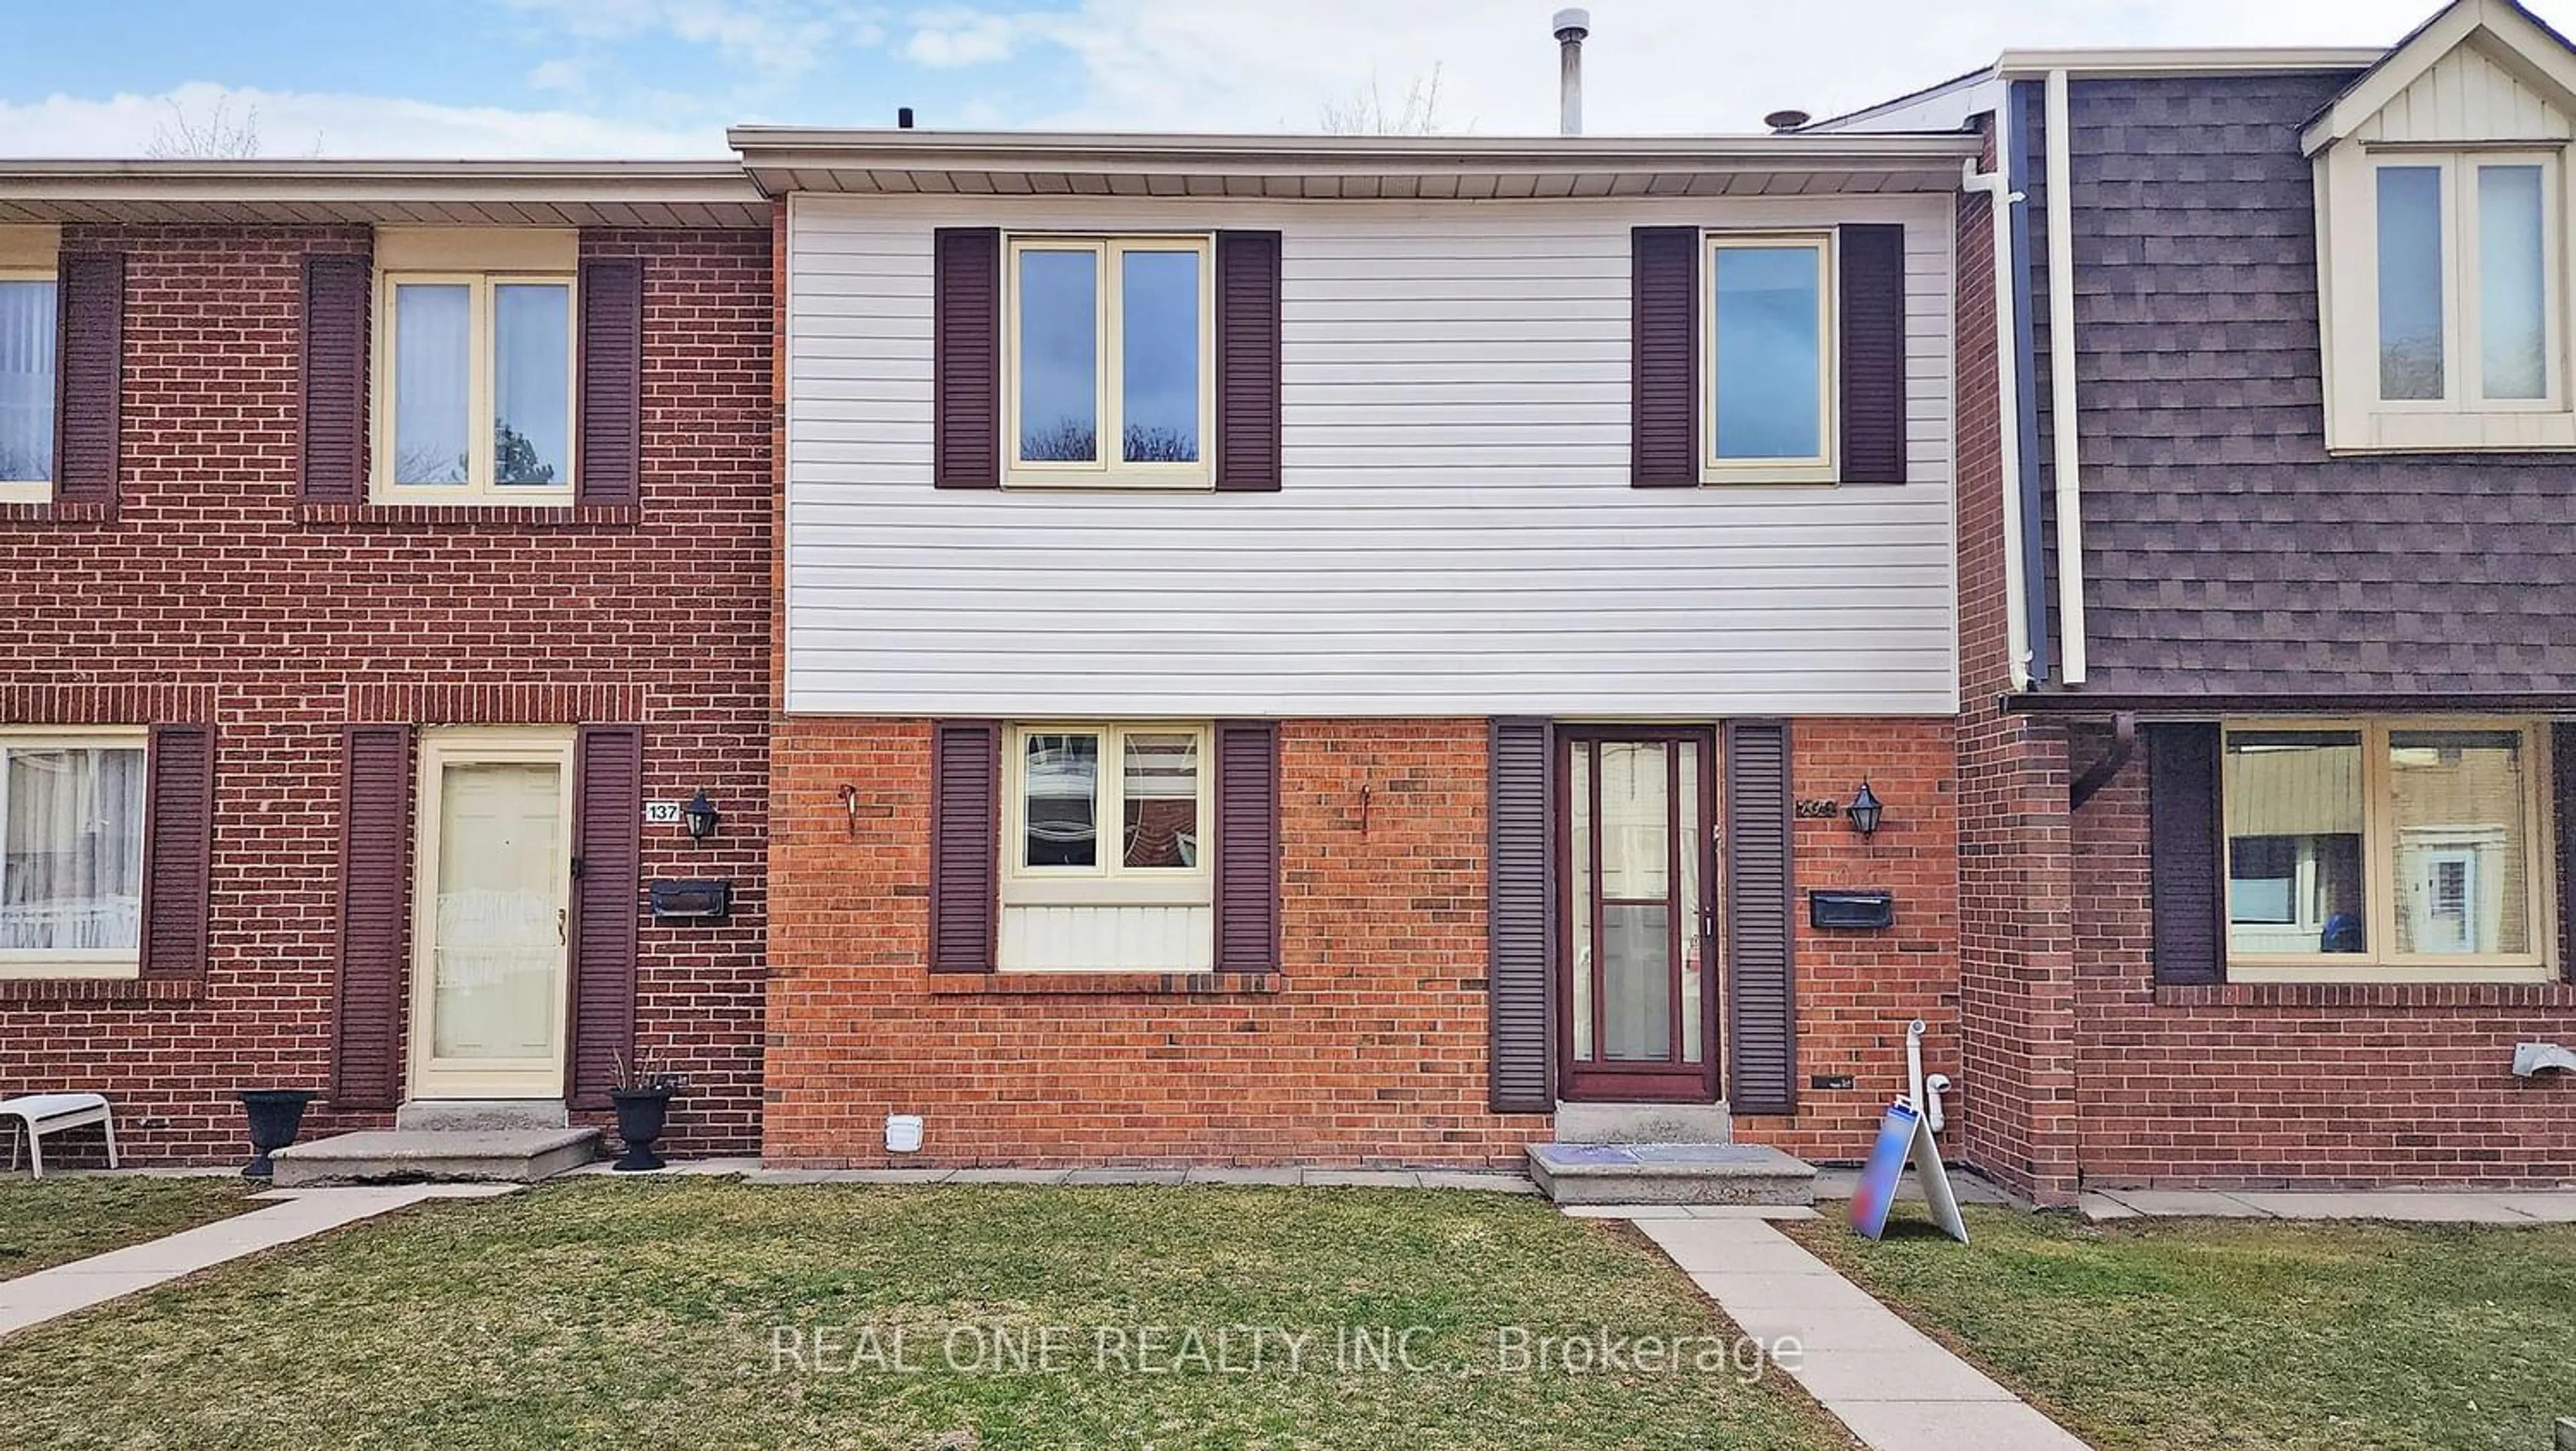 Home with brick exterior material for 270 Timberbank Blvd #139, Toronto Ontario M1W 2M1